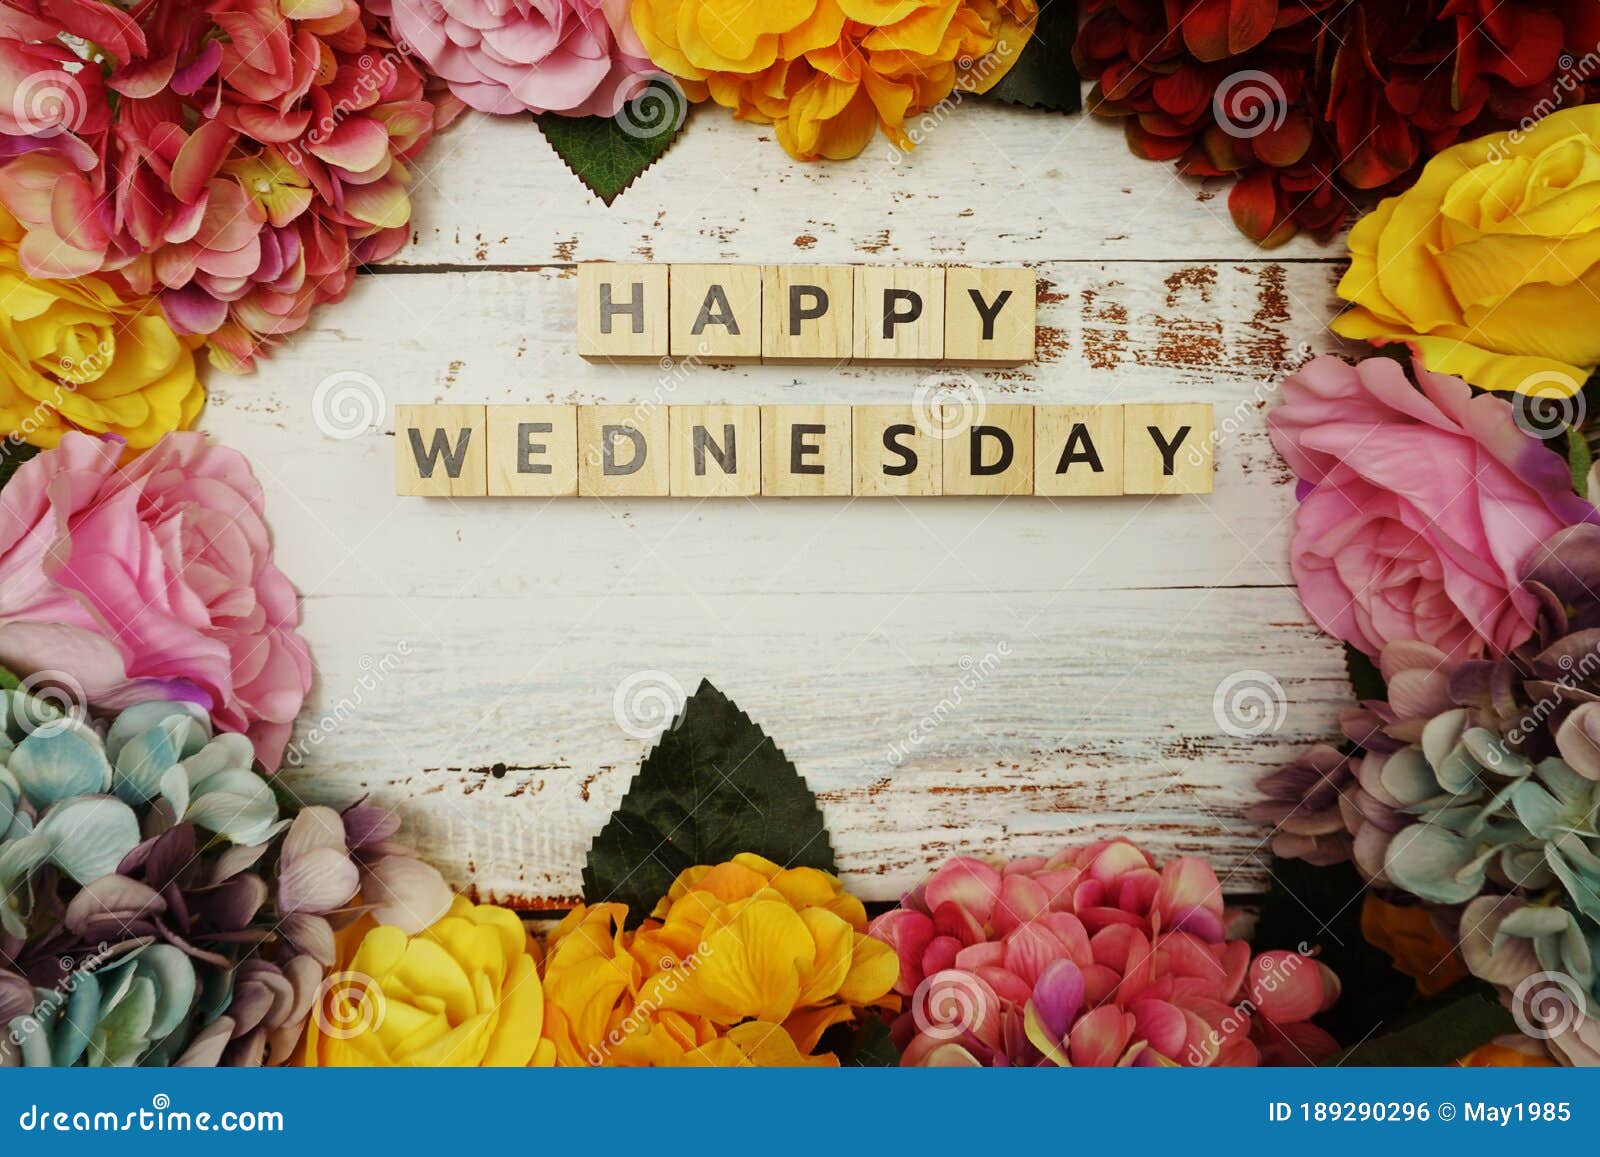 Happy Wednesday Alphabet Letter with Colorful Flowers Border Frame ...